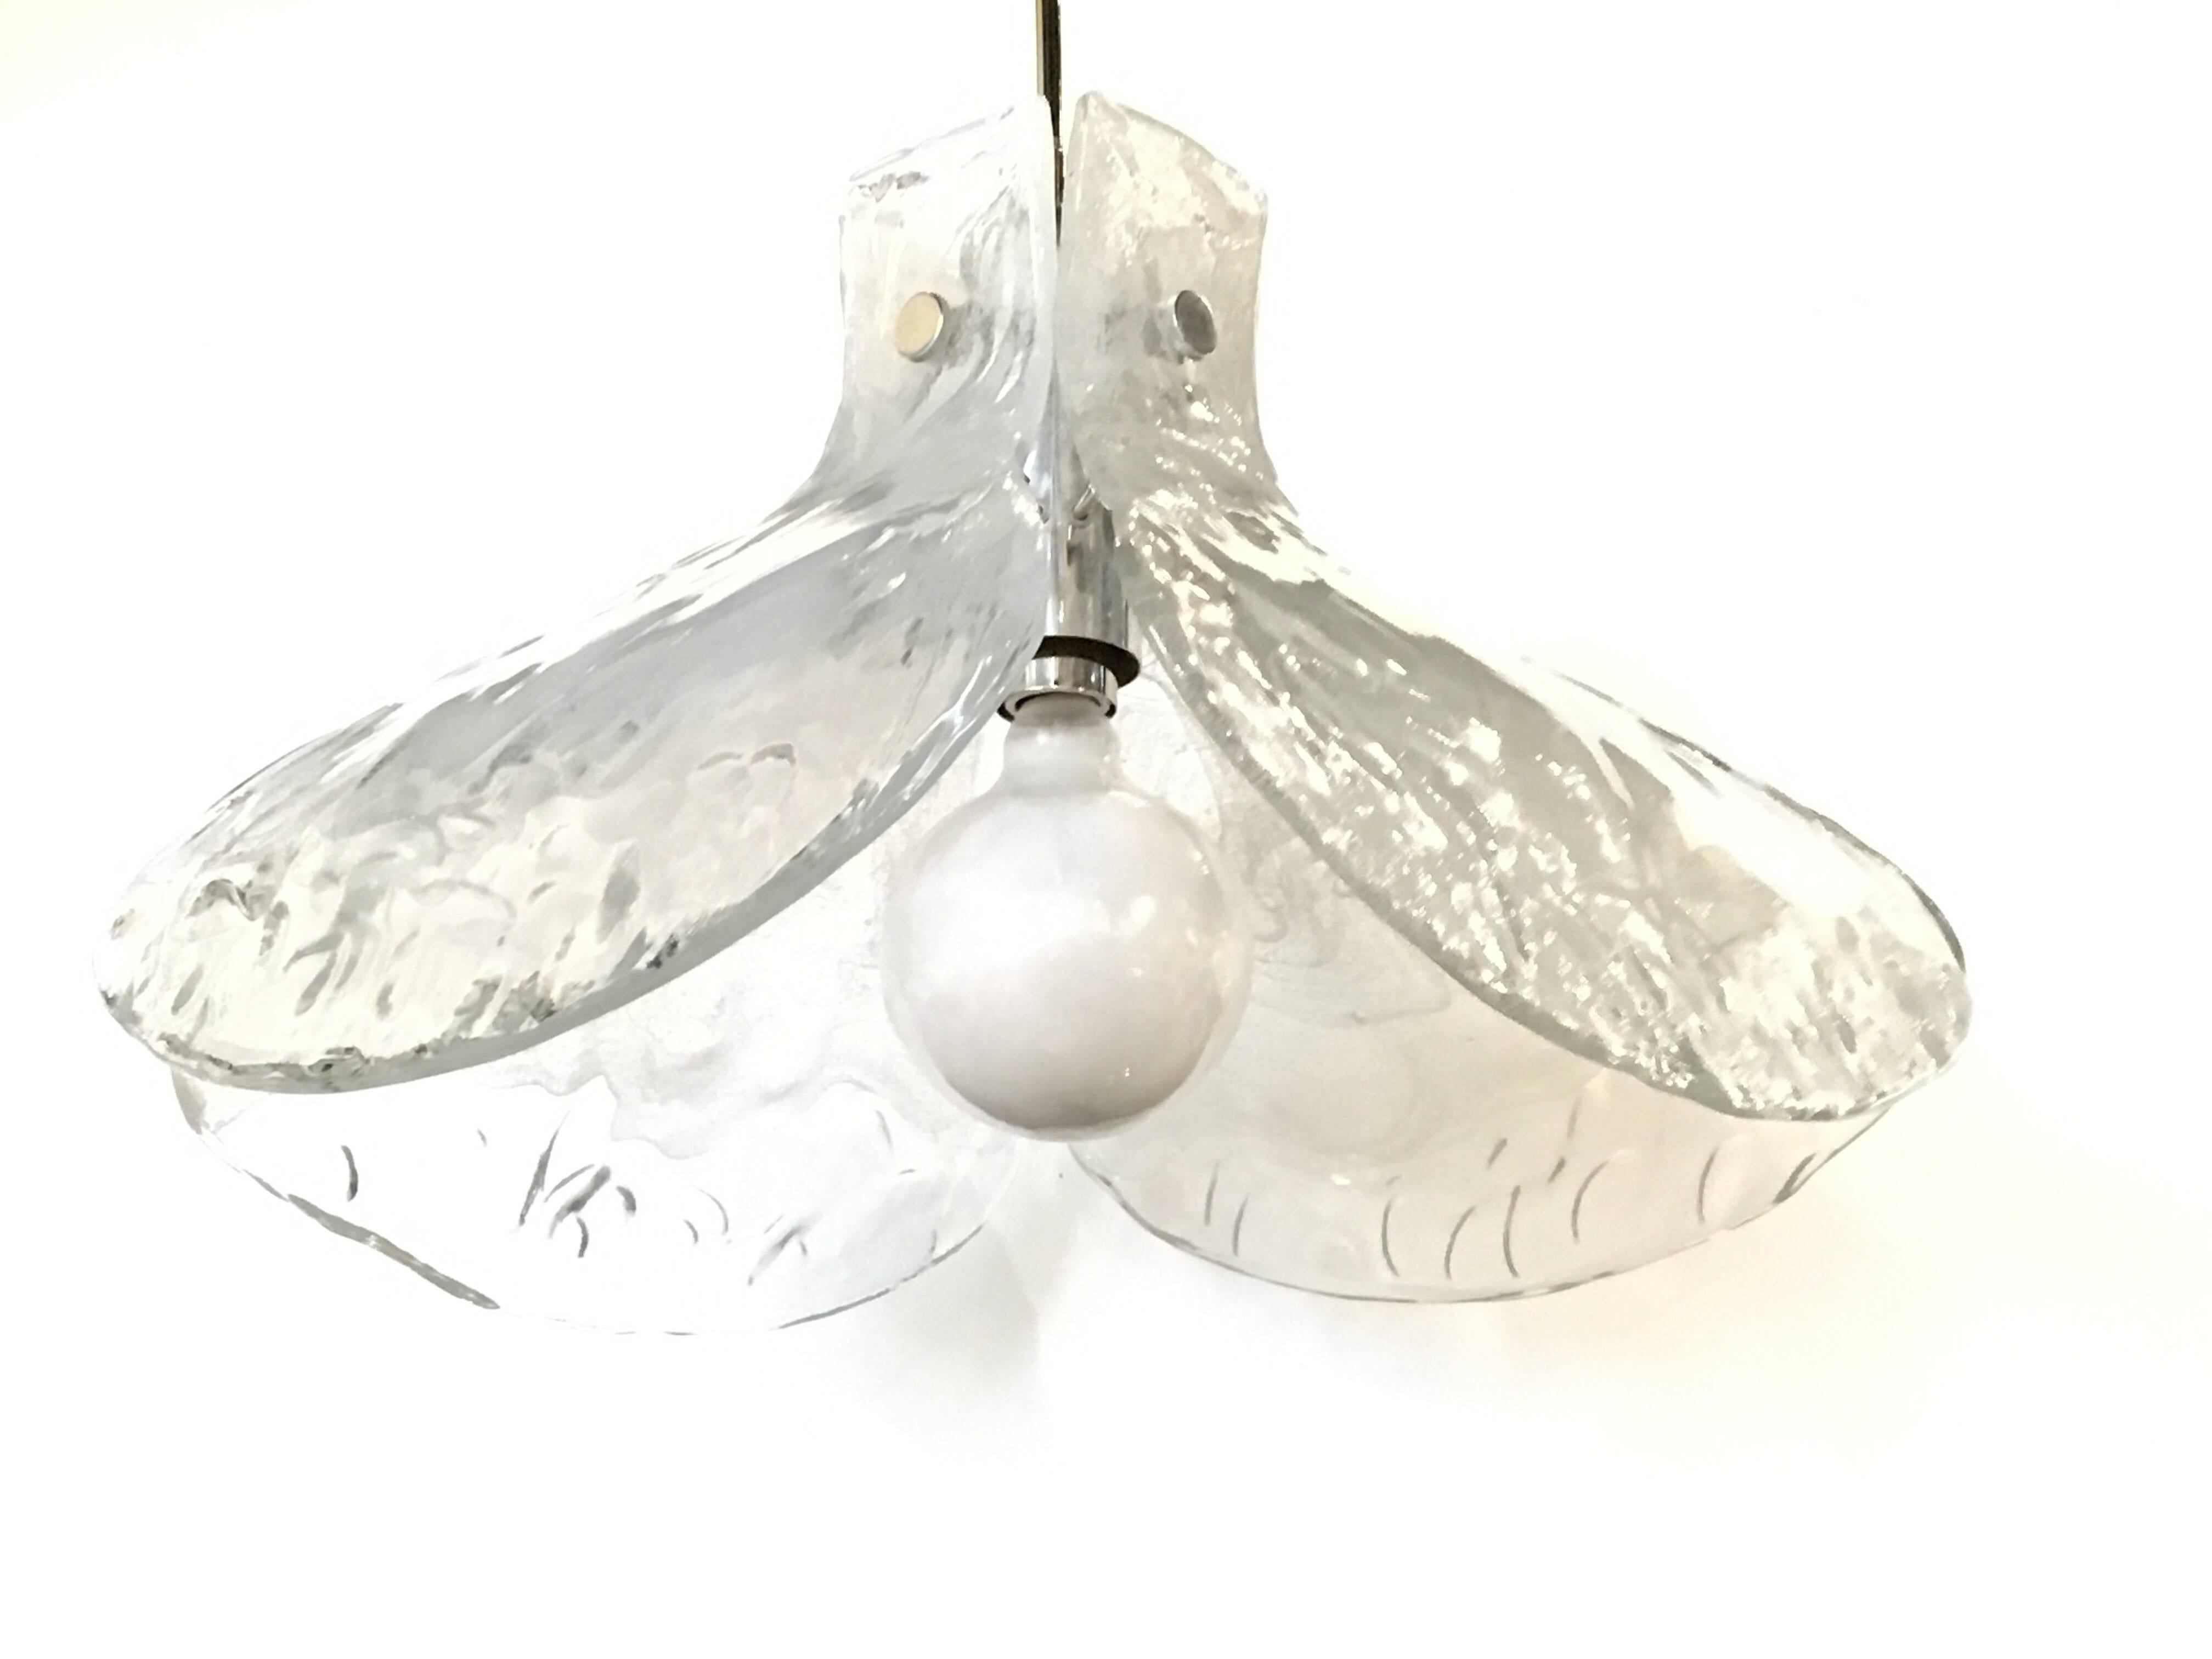 A beautiful 1960s pendant chandelier composed of four large Murano glass pedals which are white and fade out to clear. The hardware is polished chrome and cases a regular Edison socket.
Dimensions for just the glass part without the